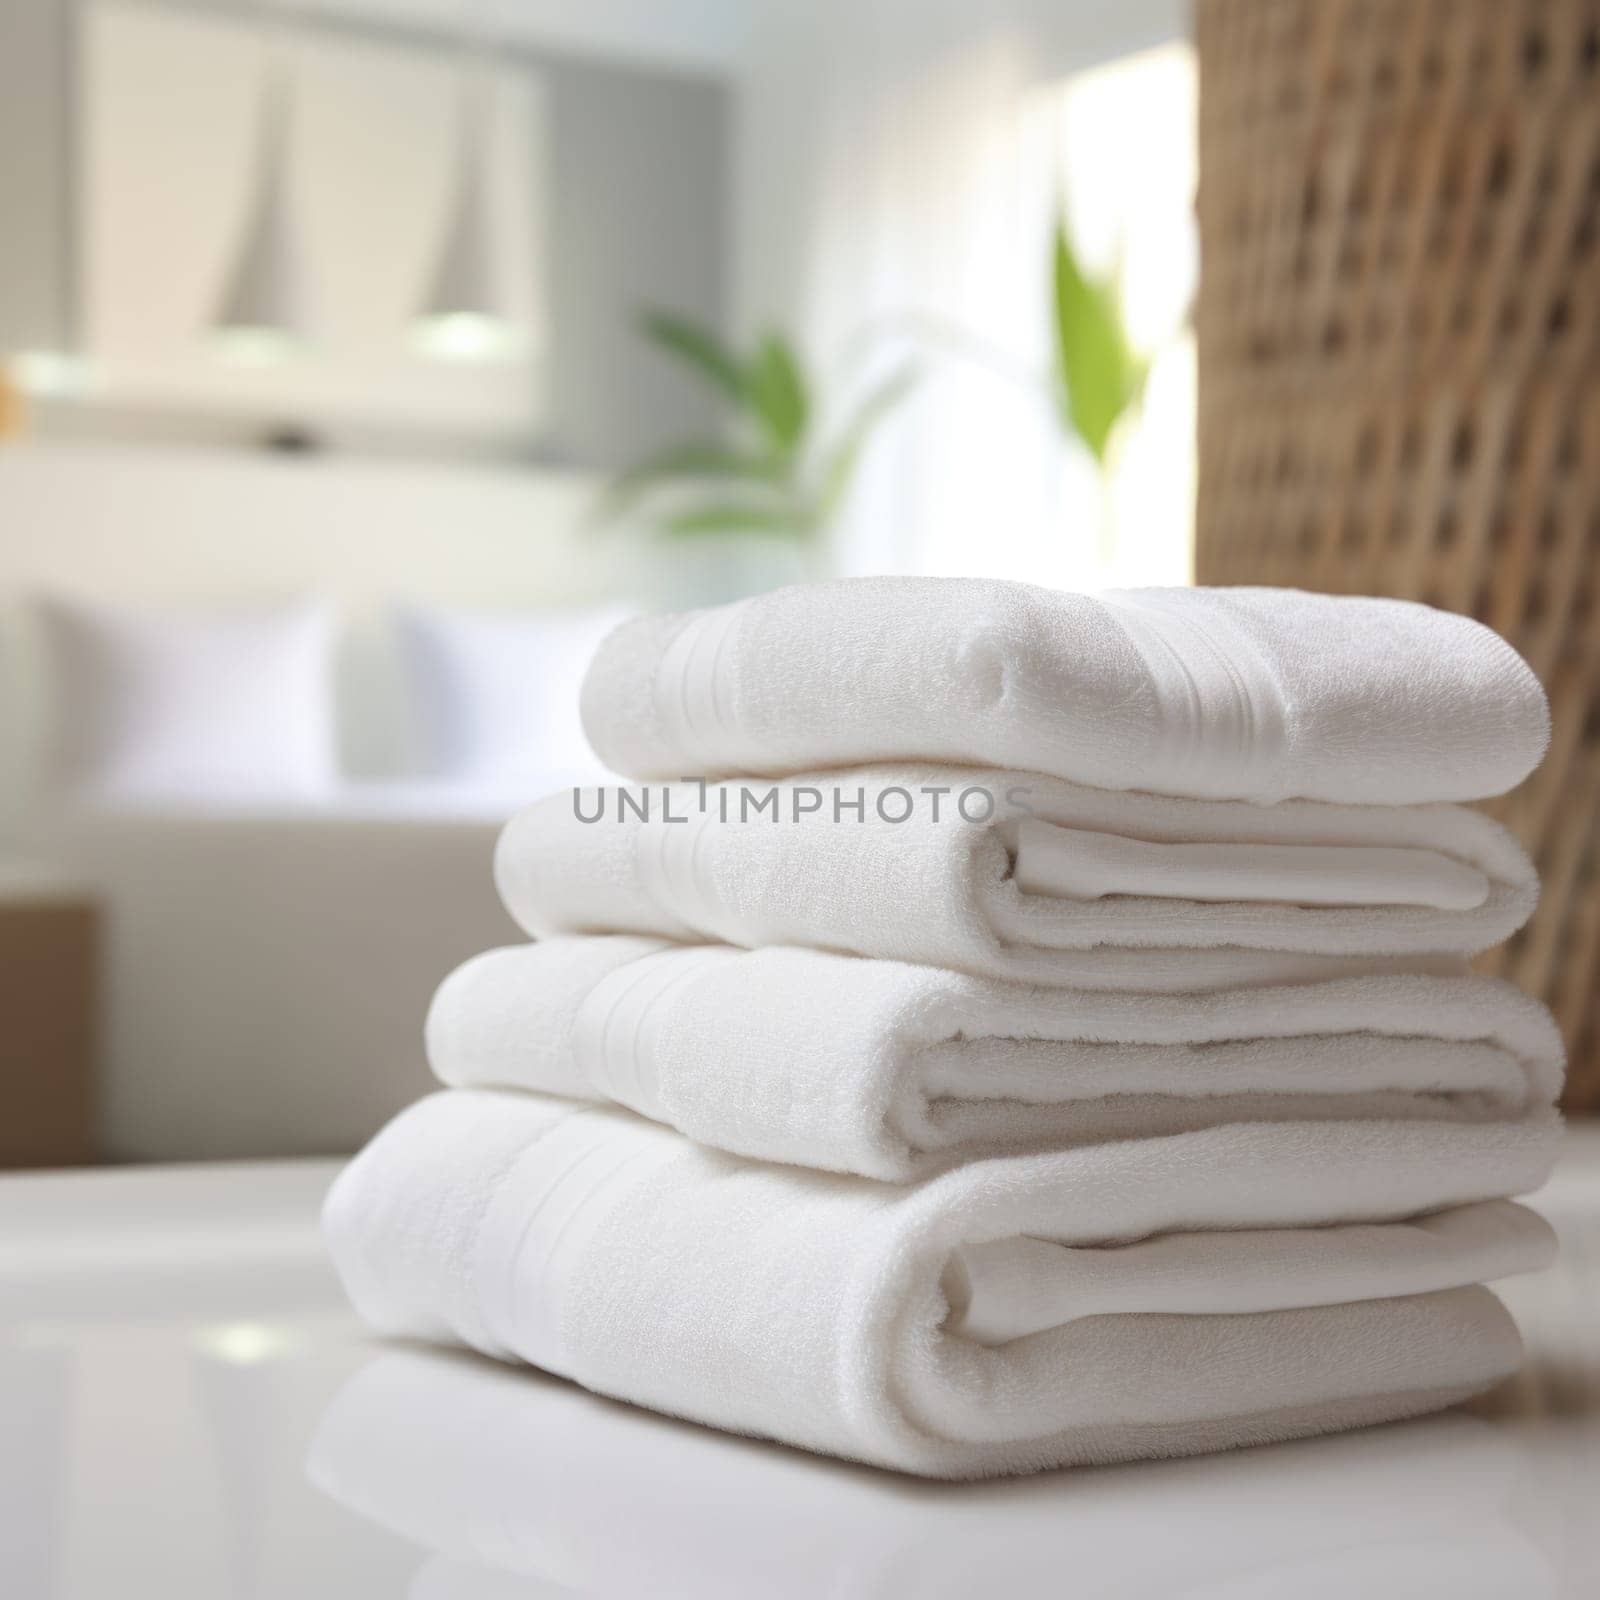 A stack of white towels on a table